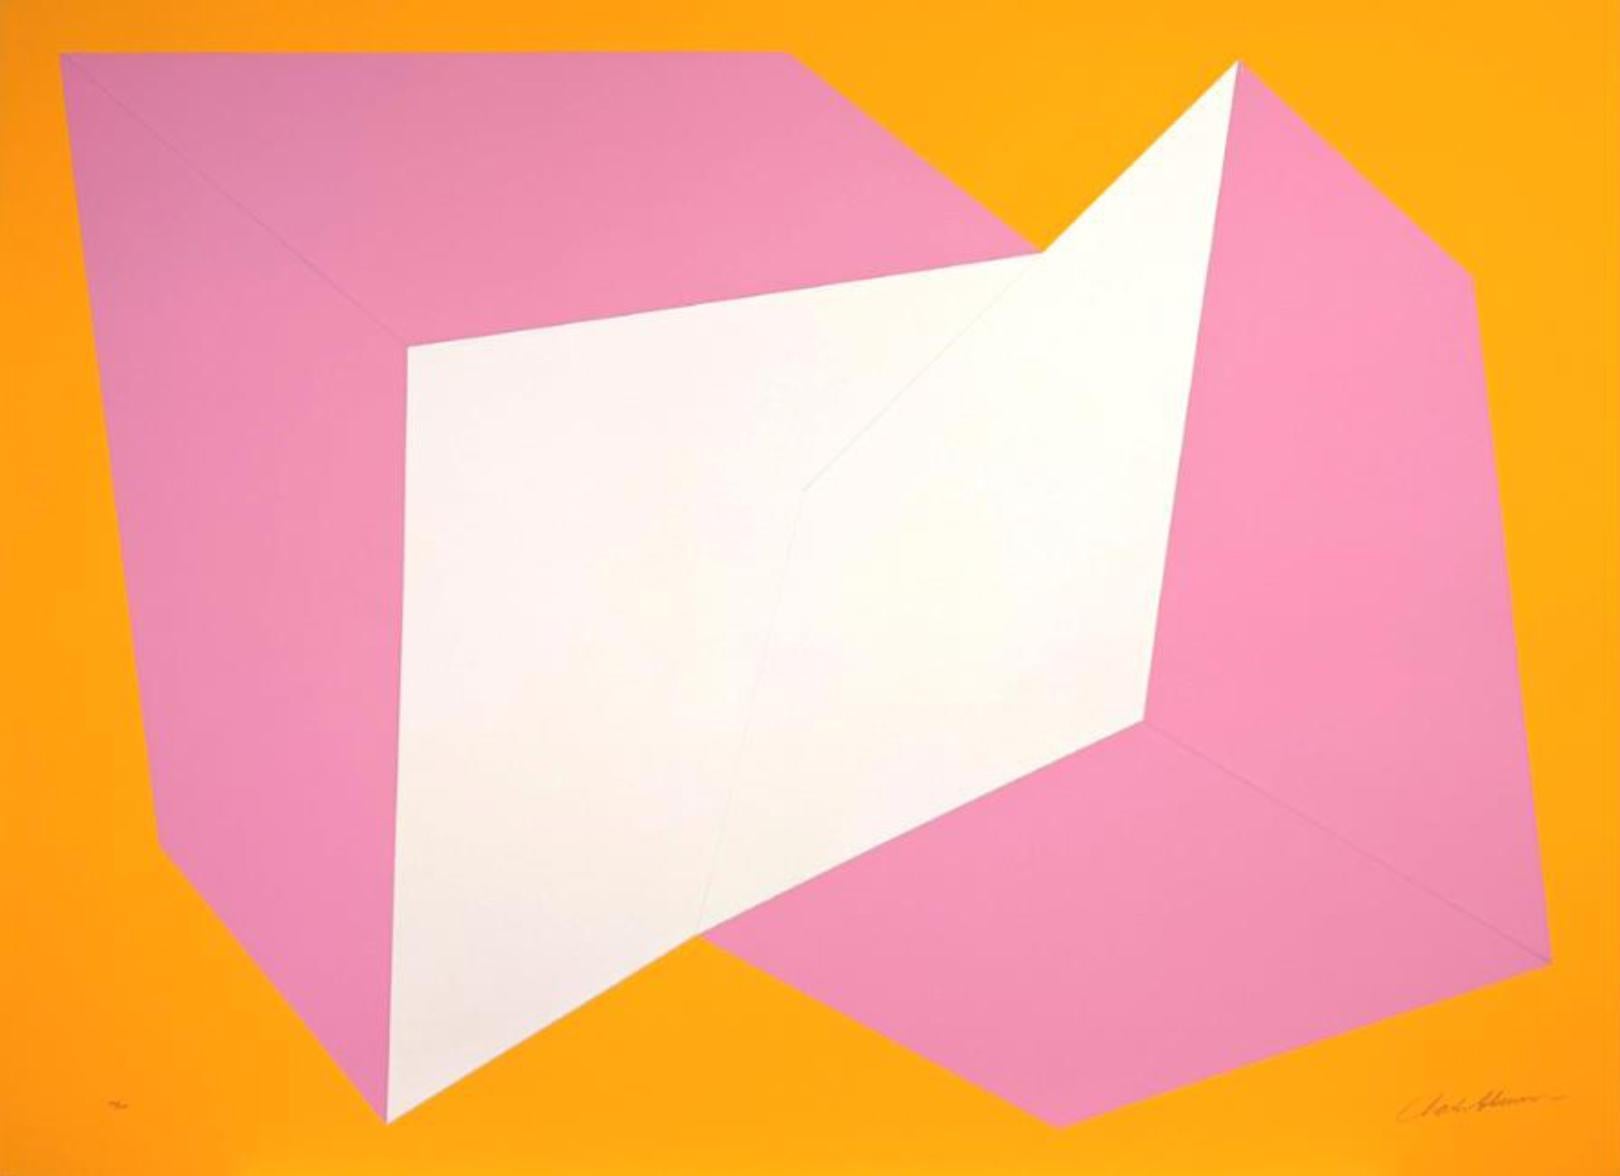 "This work was created with two separate entities that play against each other, in real and illusionary space, thus combining two separate realms that come together and play with one another.” -Charles Hinman

Pink on Orange
Charles Hinman, American